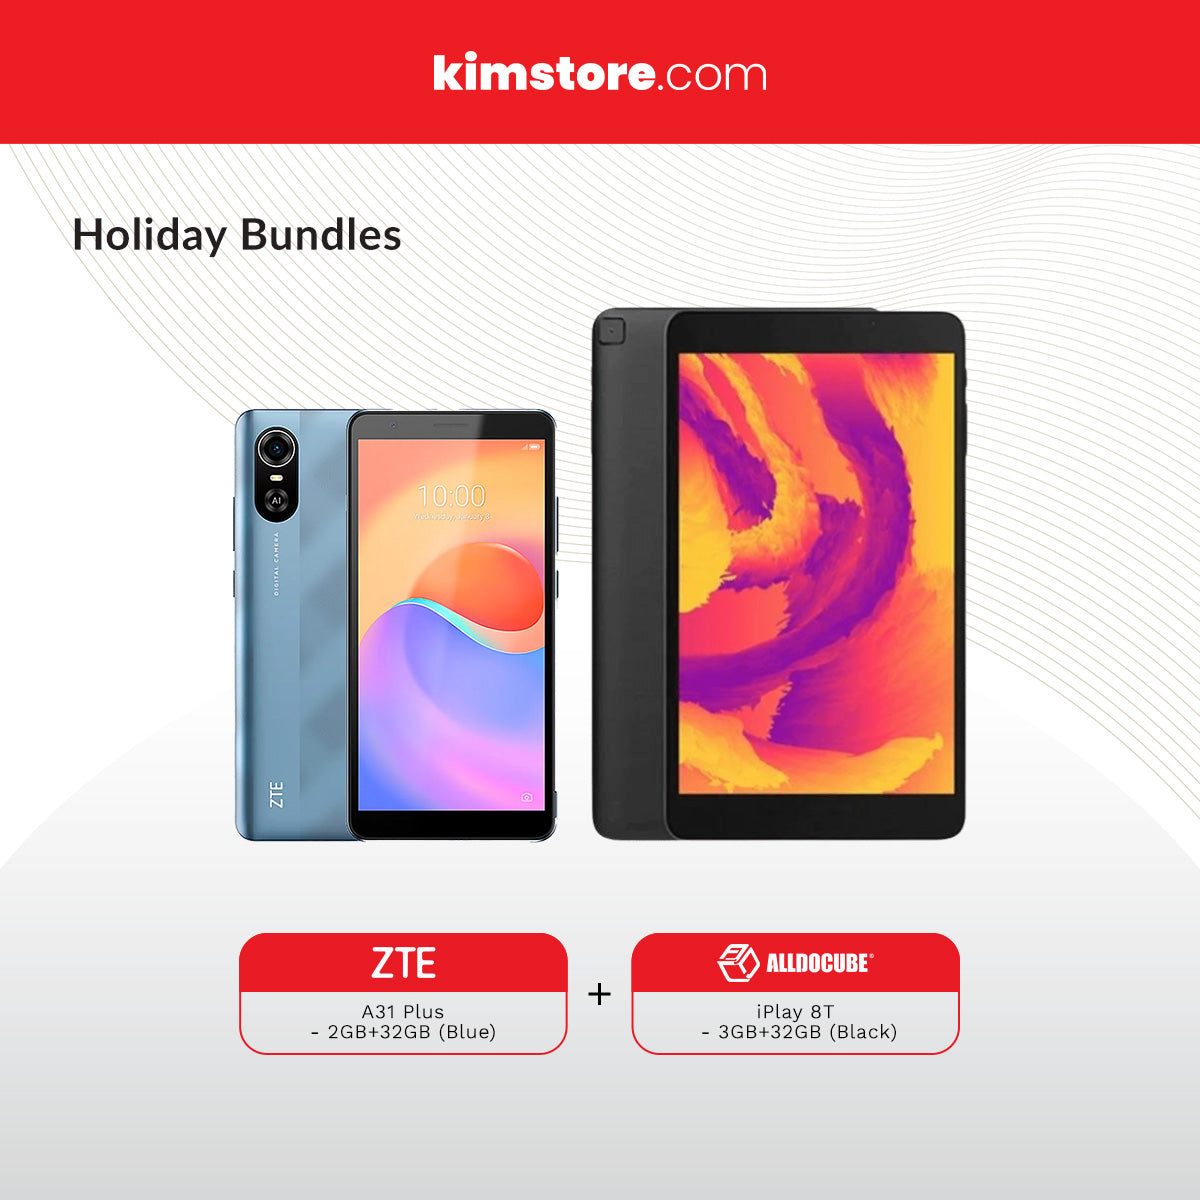 Holiday Bundle: ZTE A31 Plus (2GB/32GB) and Alldocube iPlay 8T T802 3+32GB Tablet